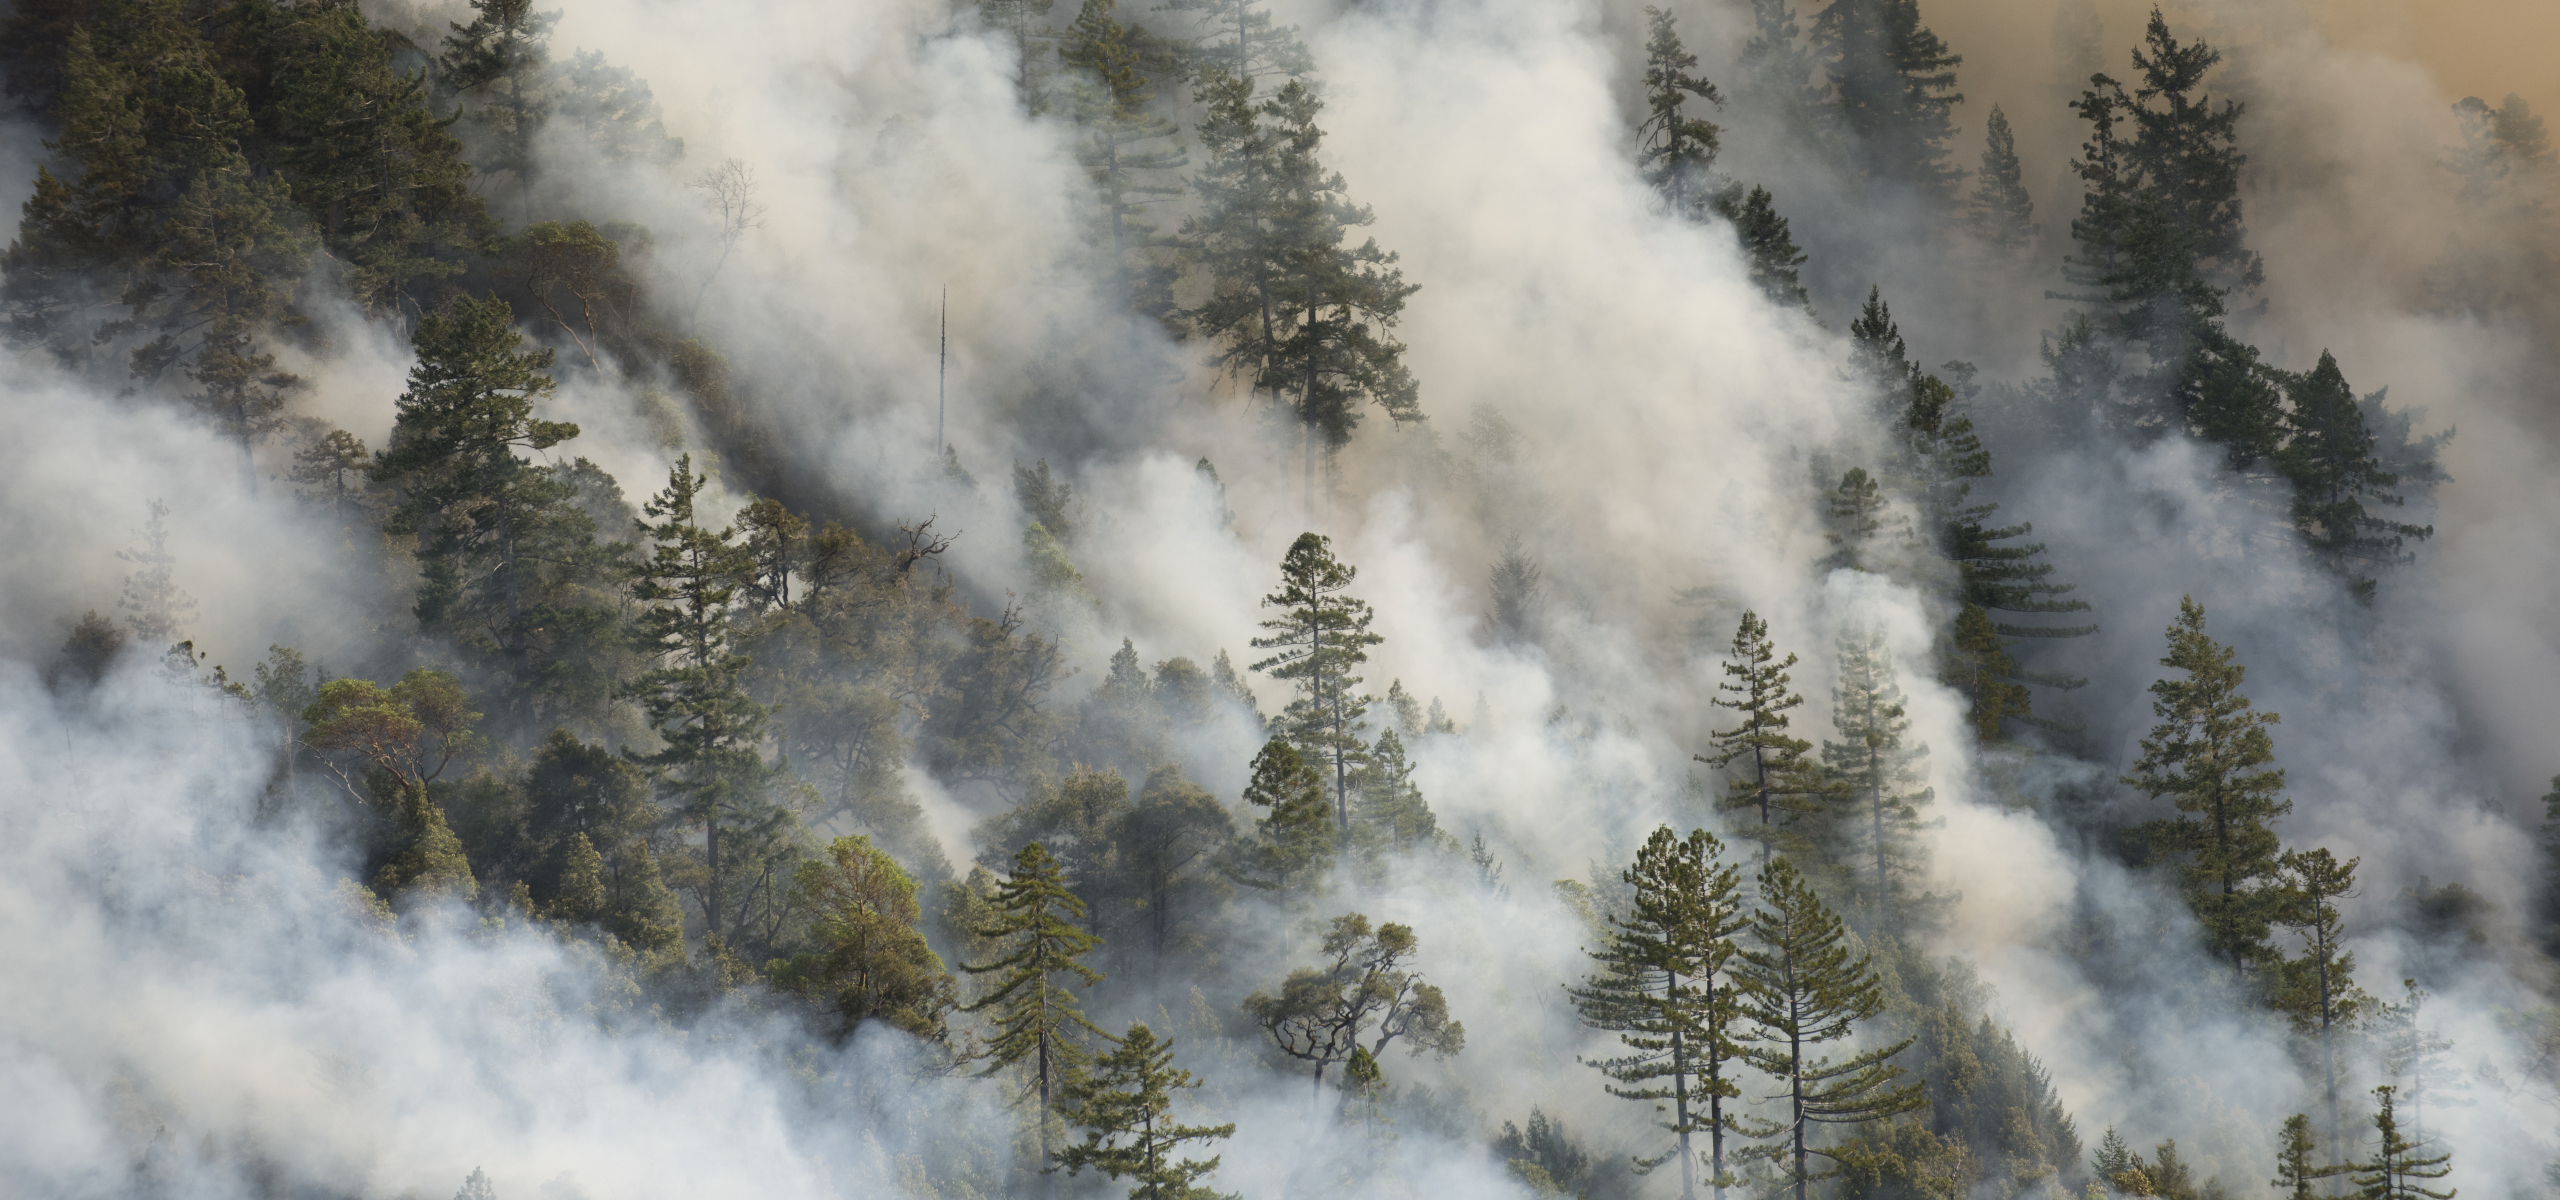 Wildfire spreading through forest